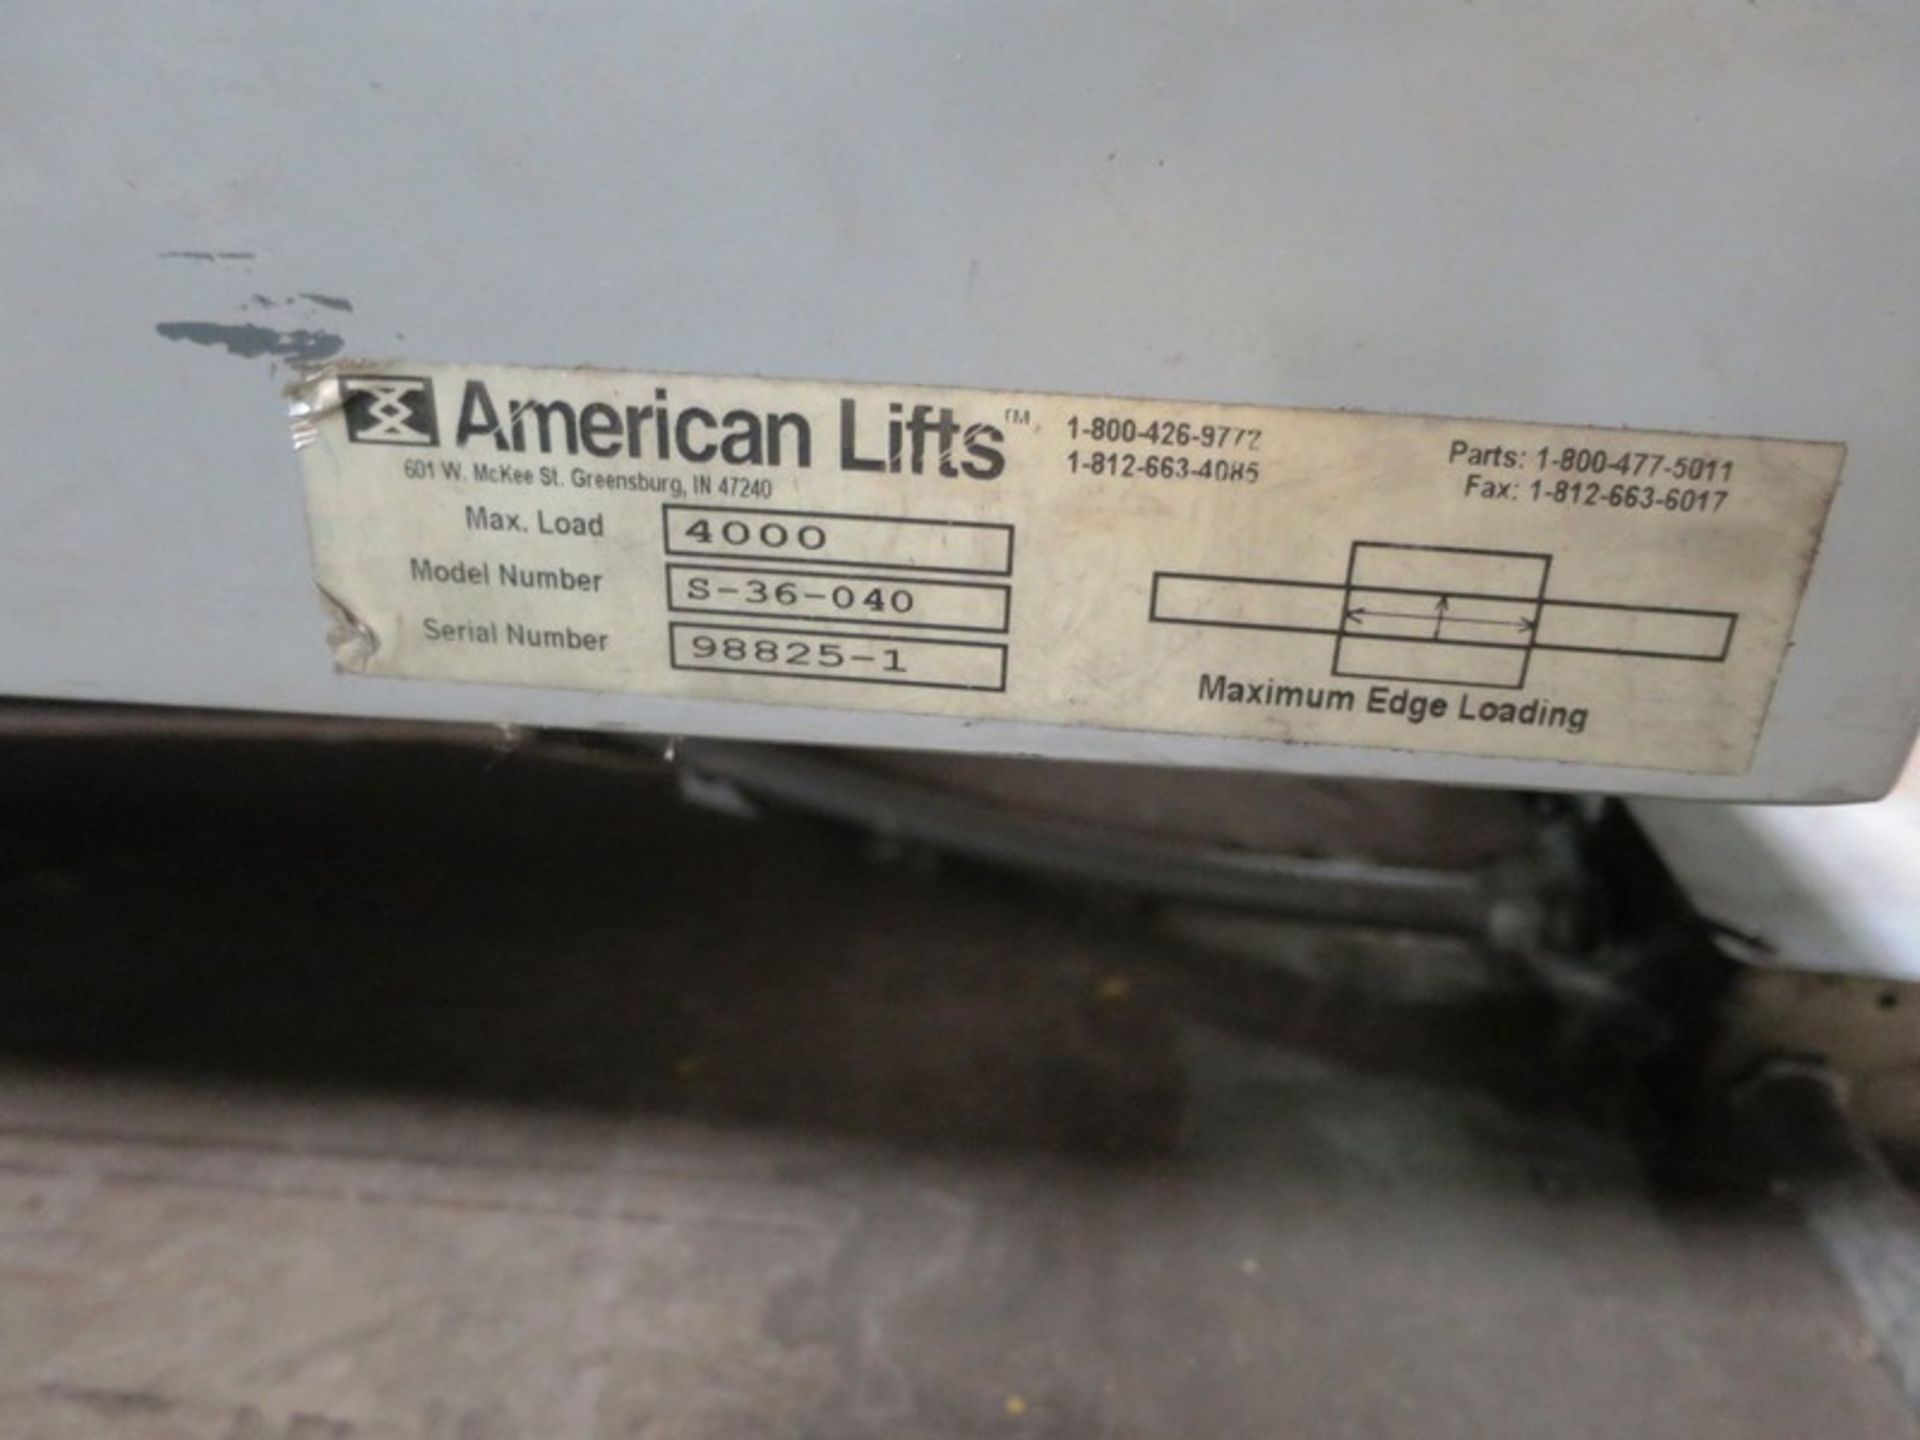 American Lifts Model S-36-040 4,000 lb. Lift Table, S/N 98825-1 - Image 4 of 4